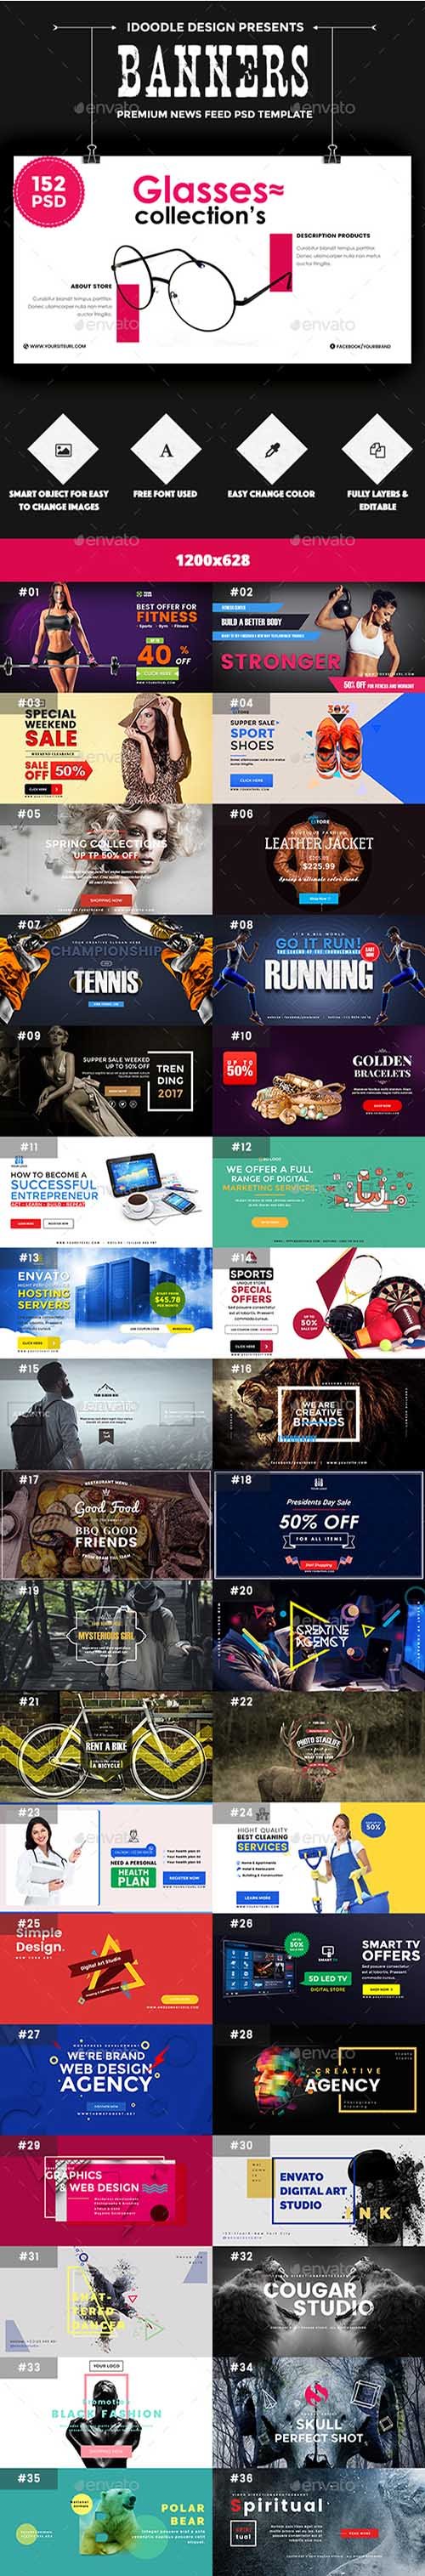 GR - Promotion NewsFeed Ads - 152 PSD [02 Size Each] 15295067